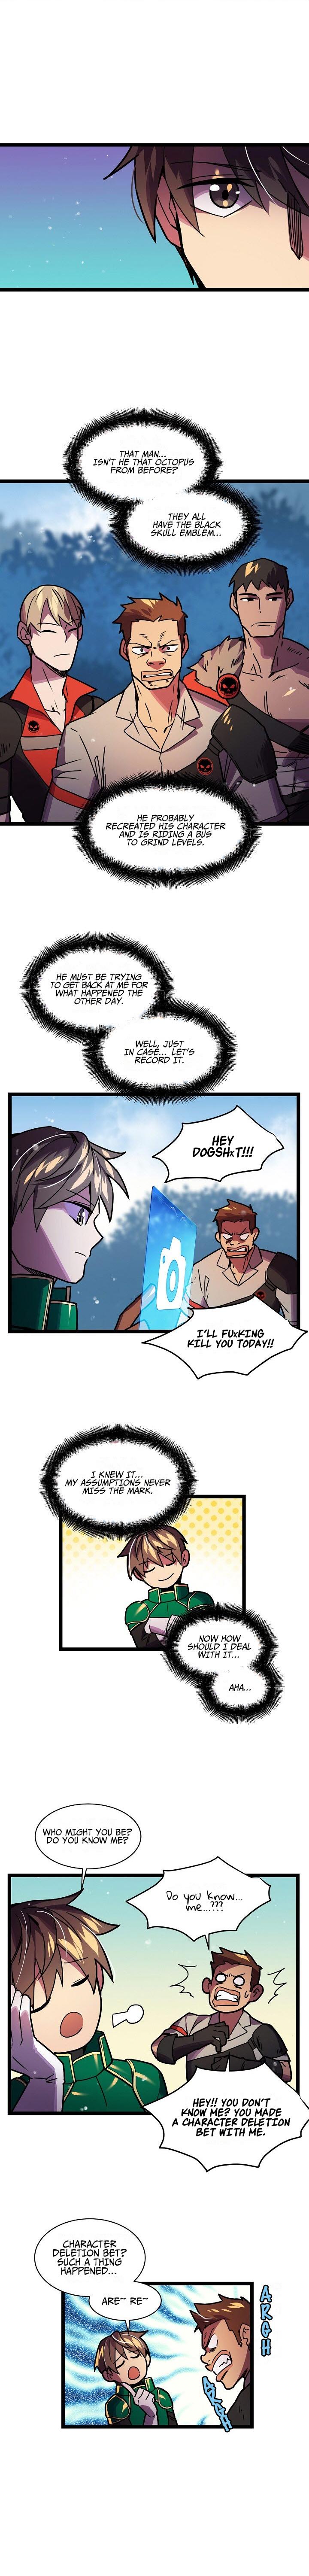 Ranker’s Return - Chapter 22 Page 5